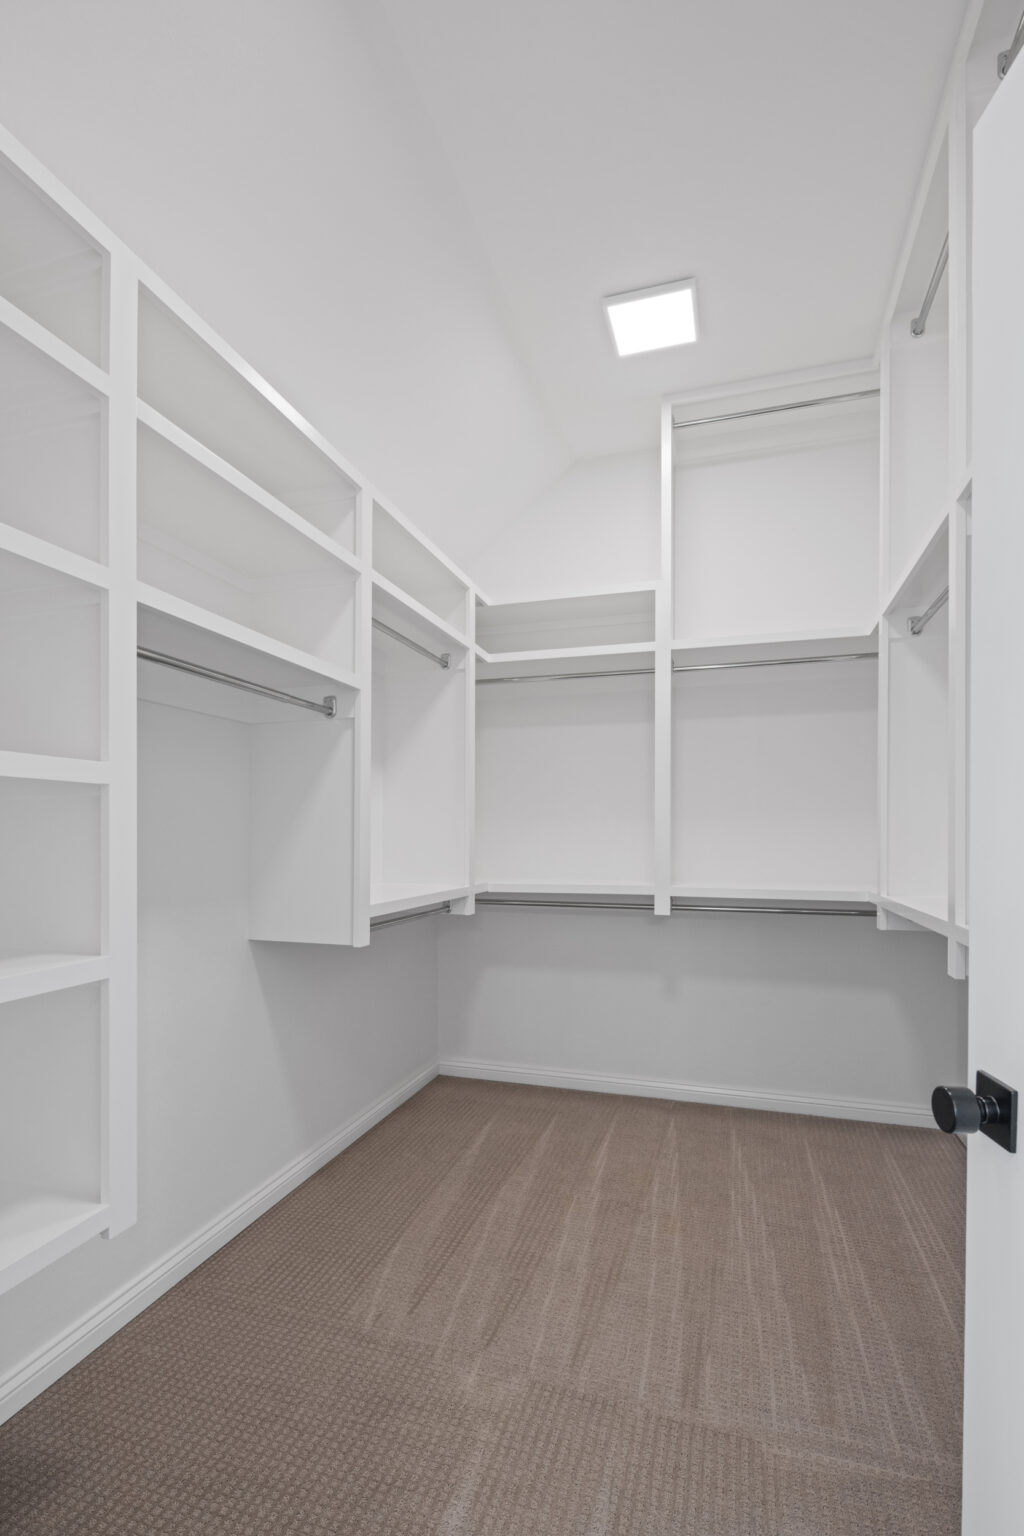 A small storage room.